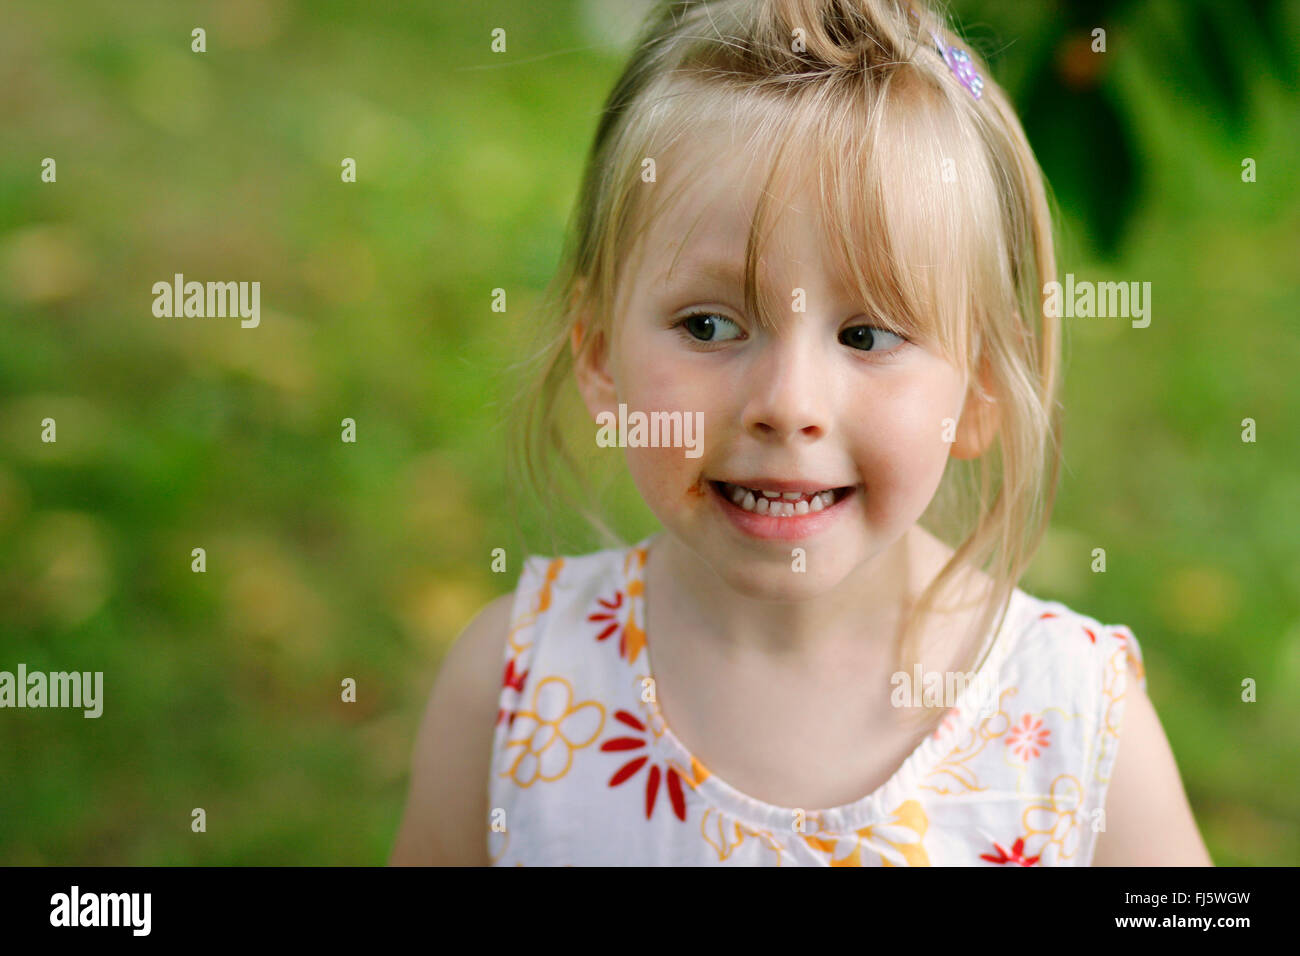 girl with chocolate mouth, Germany Stock Photo